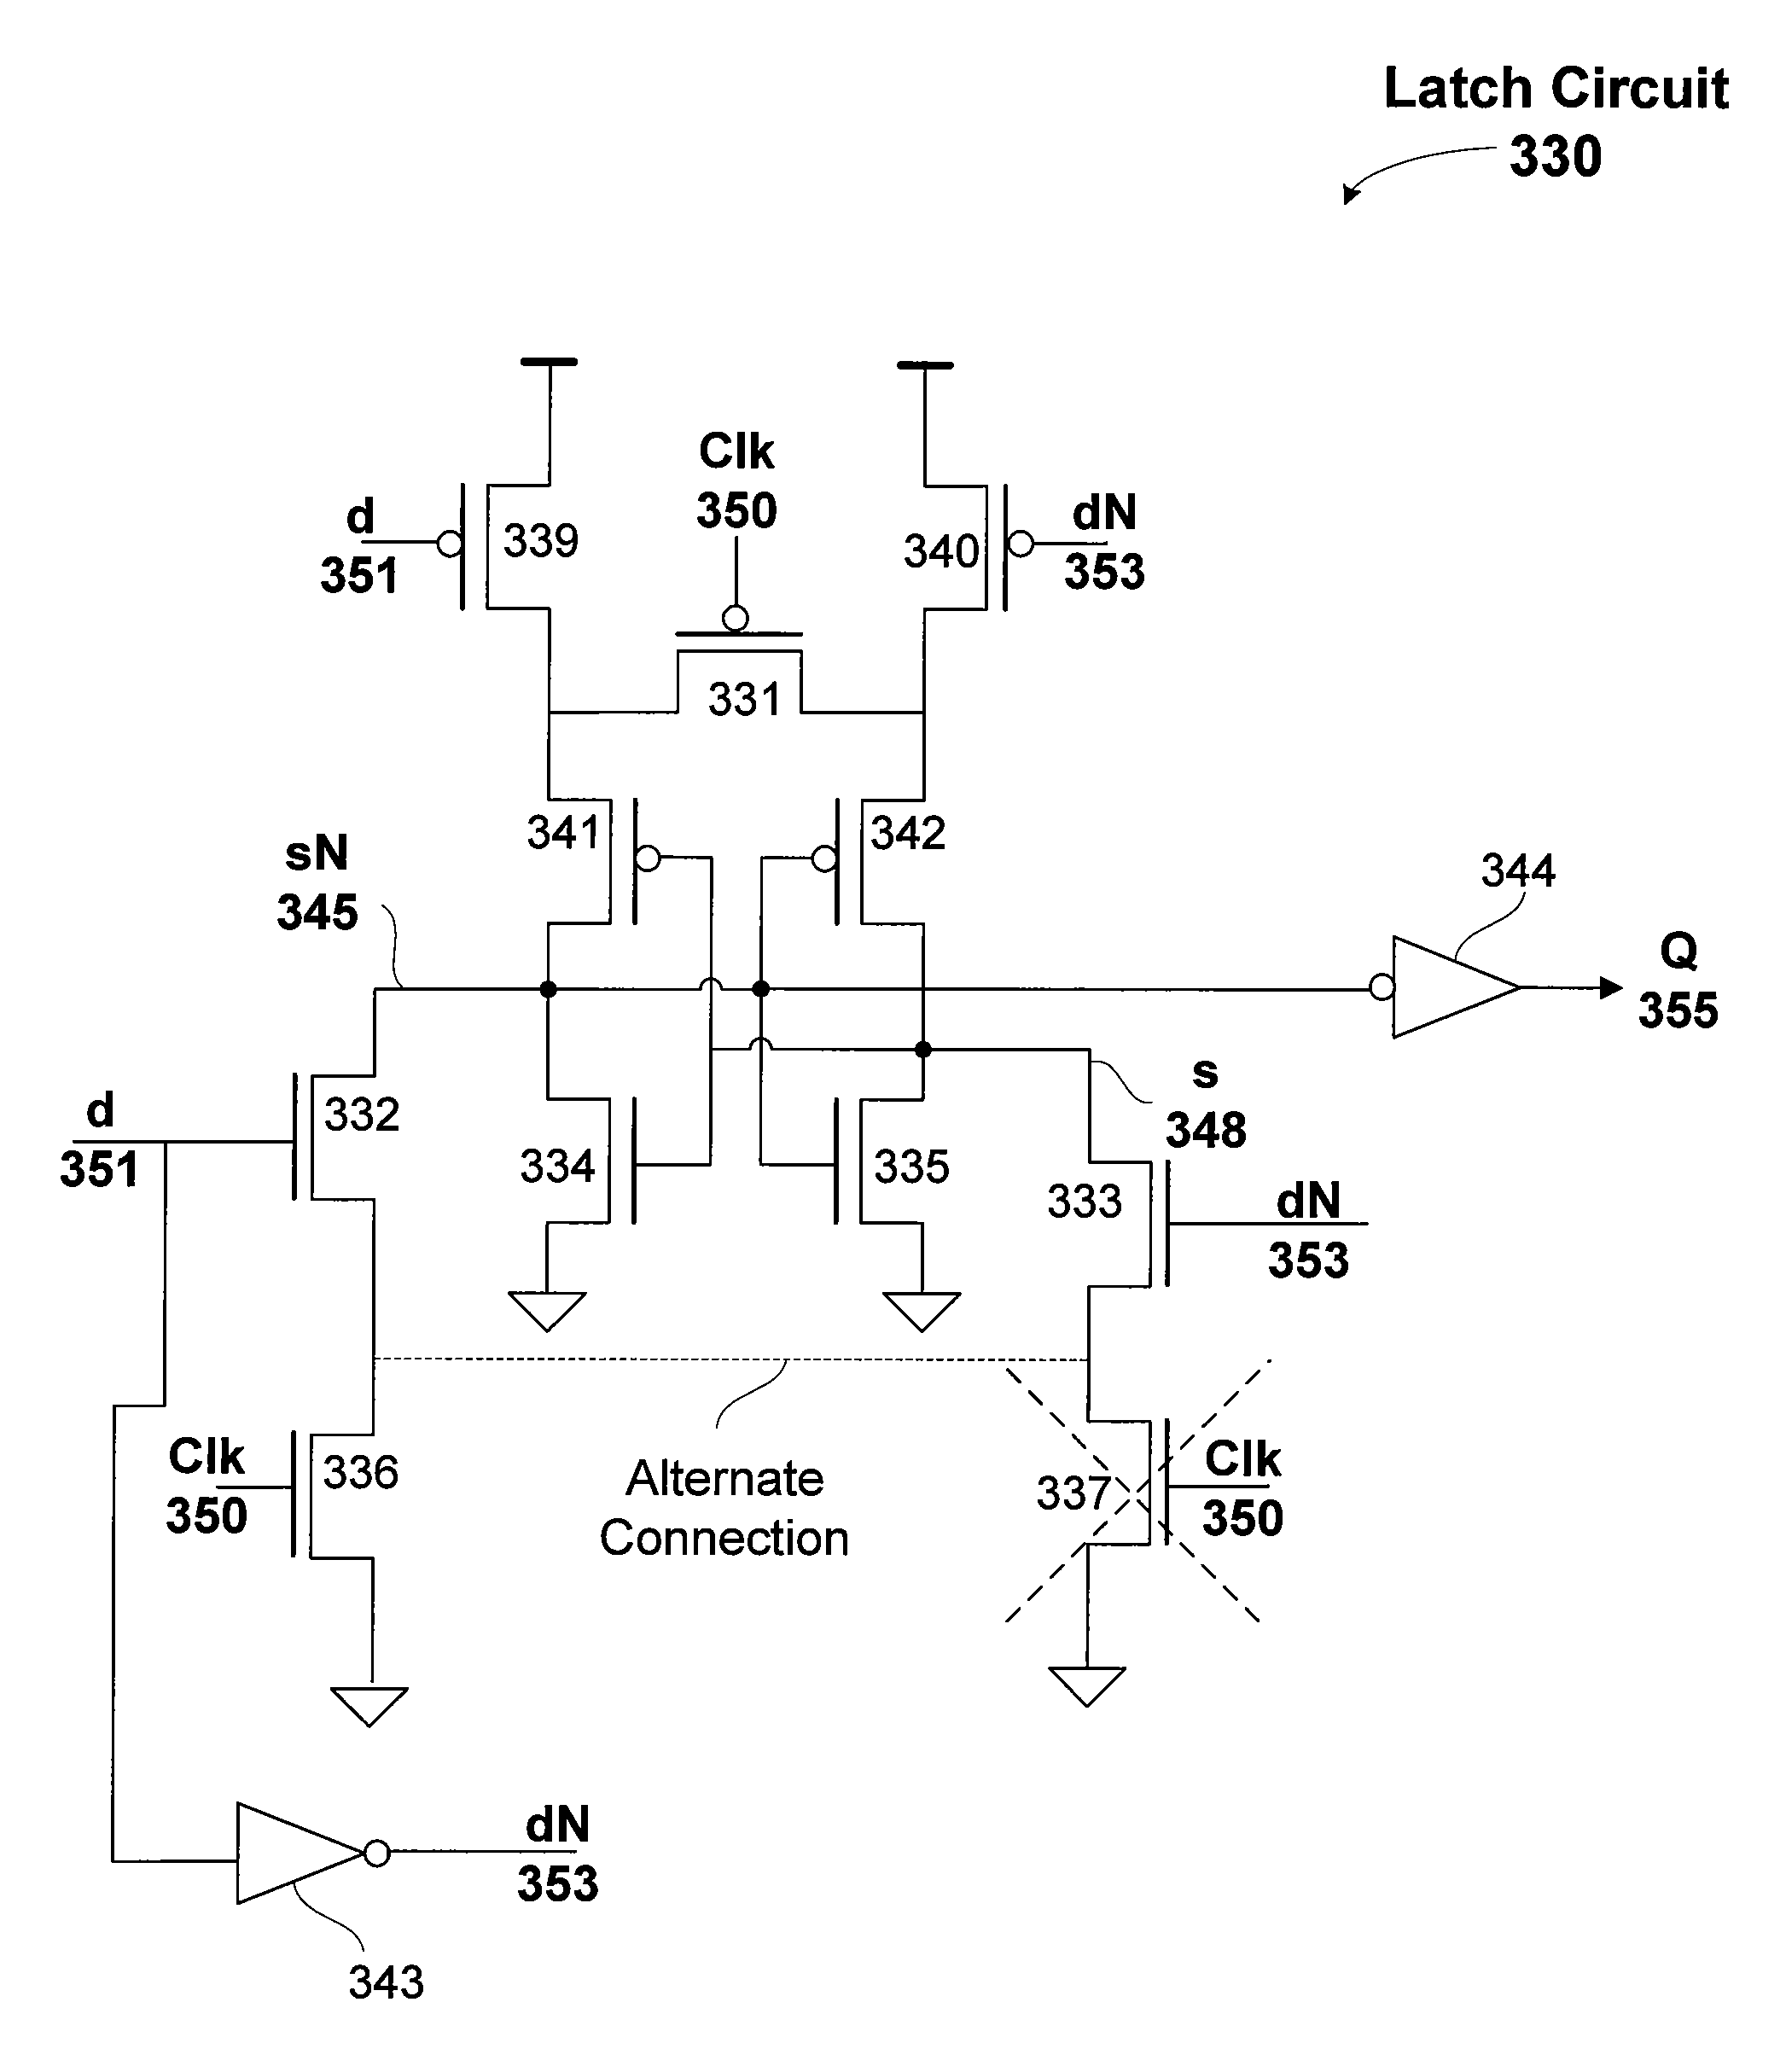 Latch circuit with a bridging device